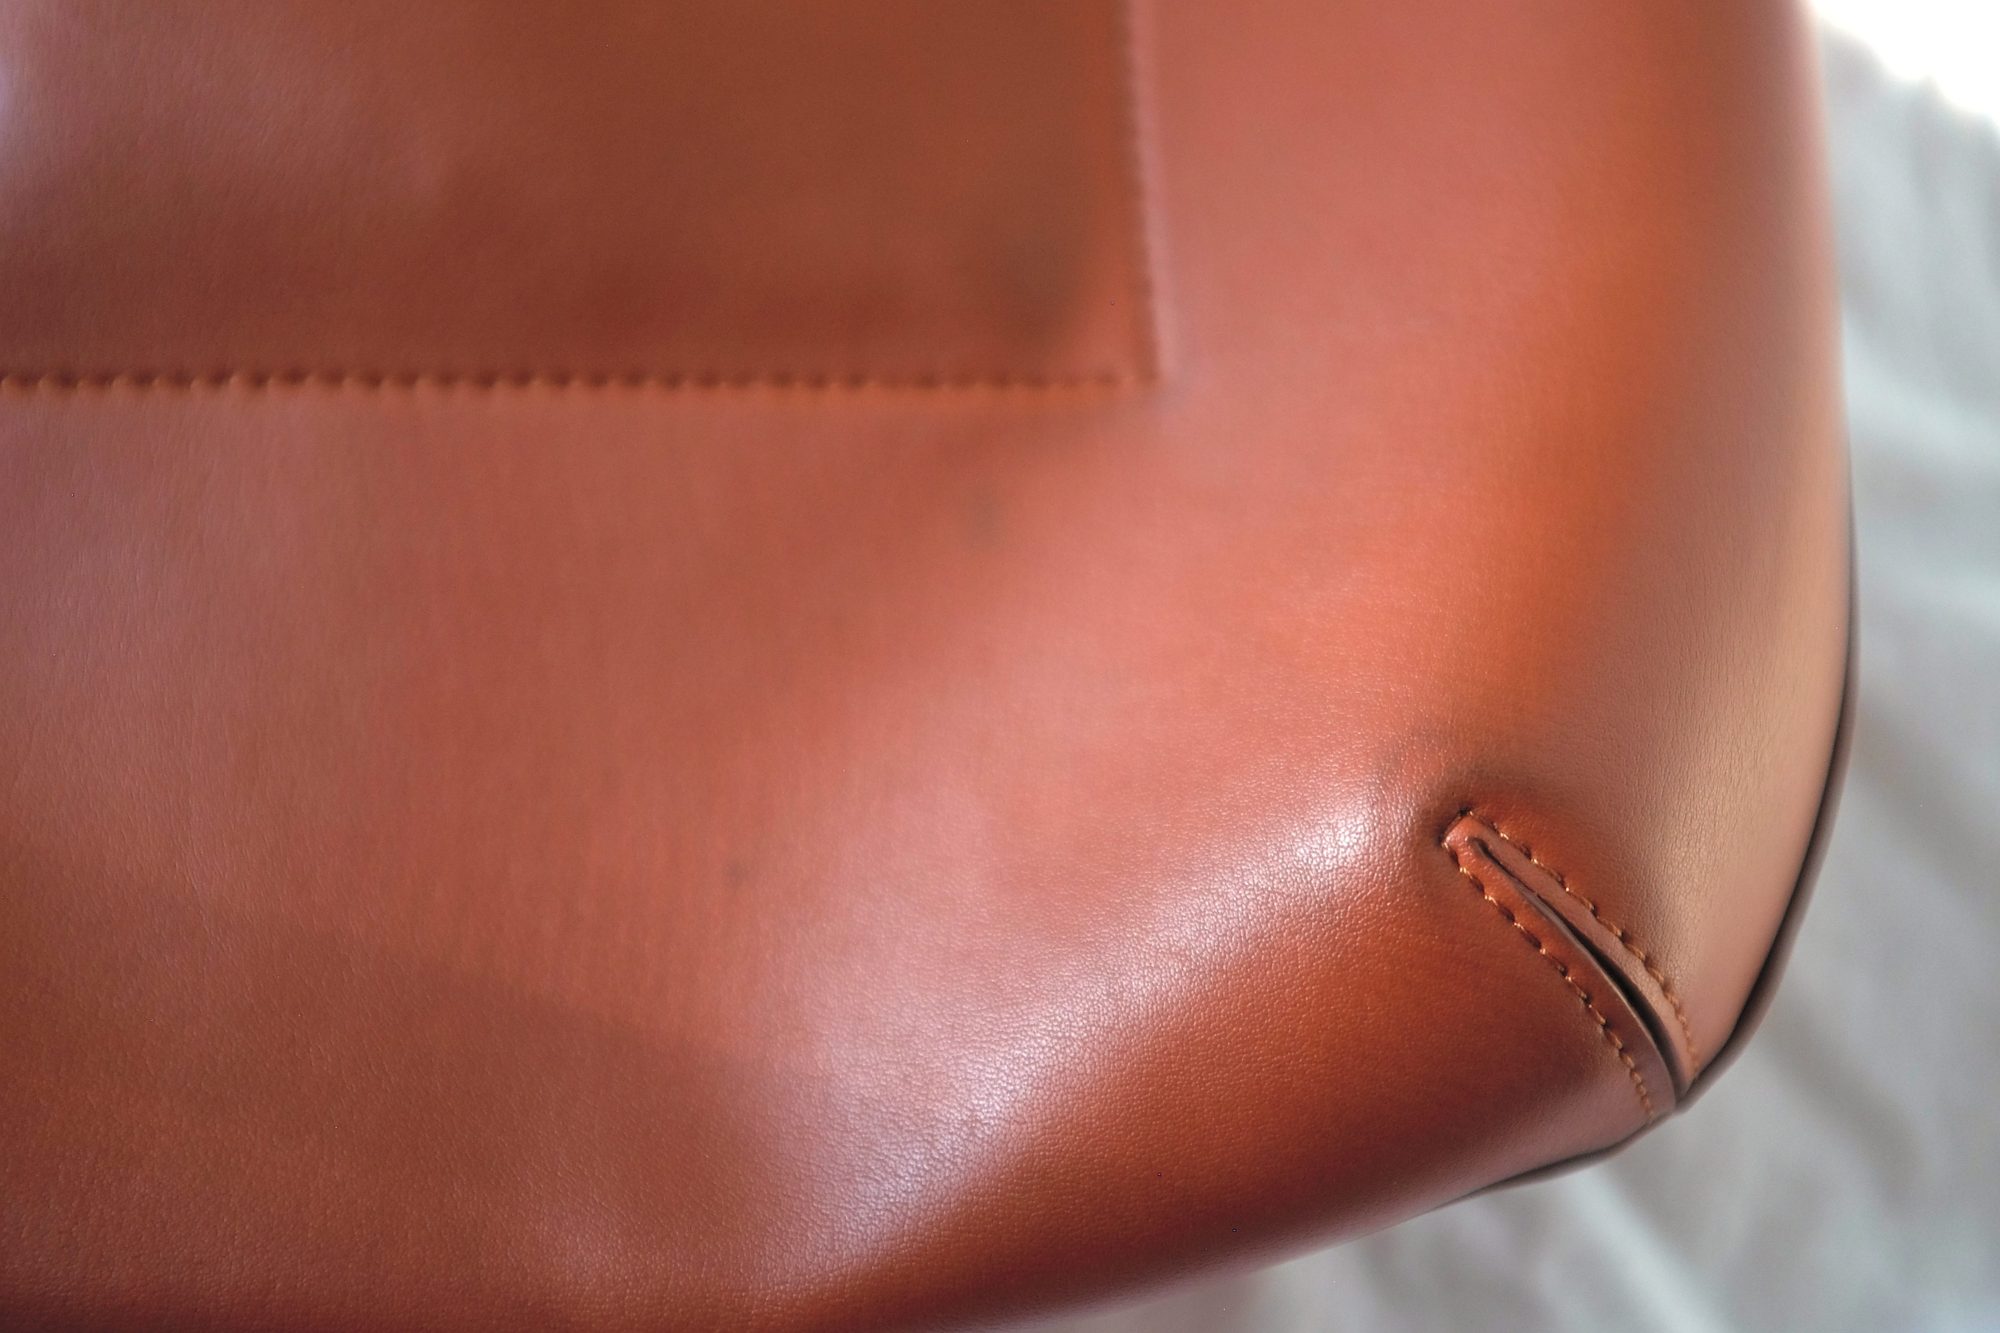 The corners of the Cactus Leather Hobo, which have some darker spots